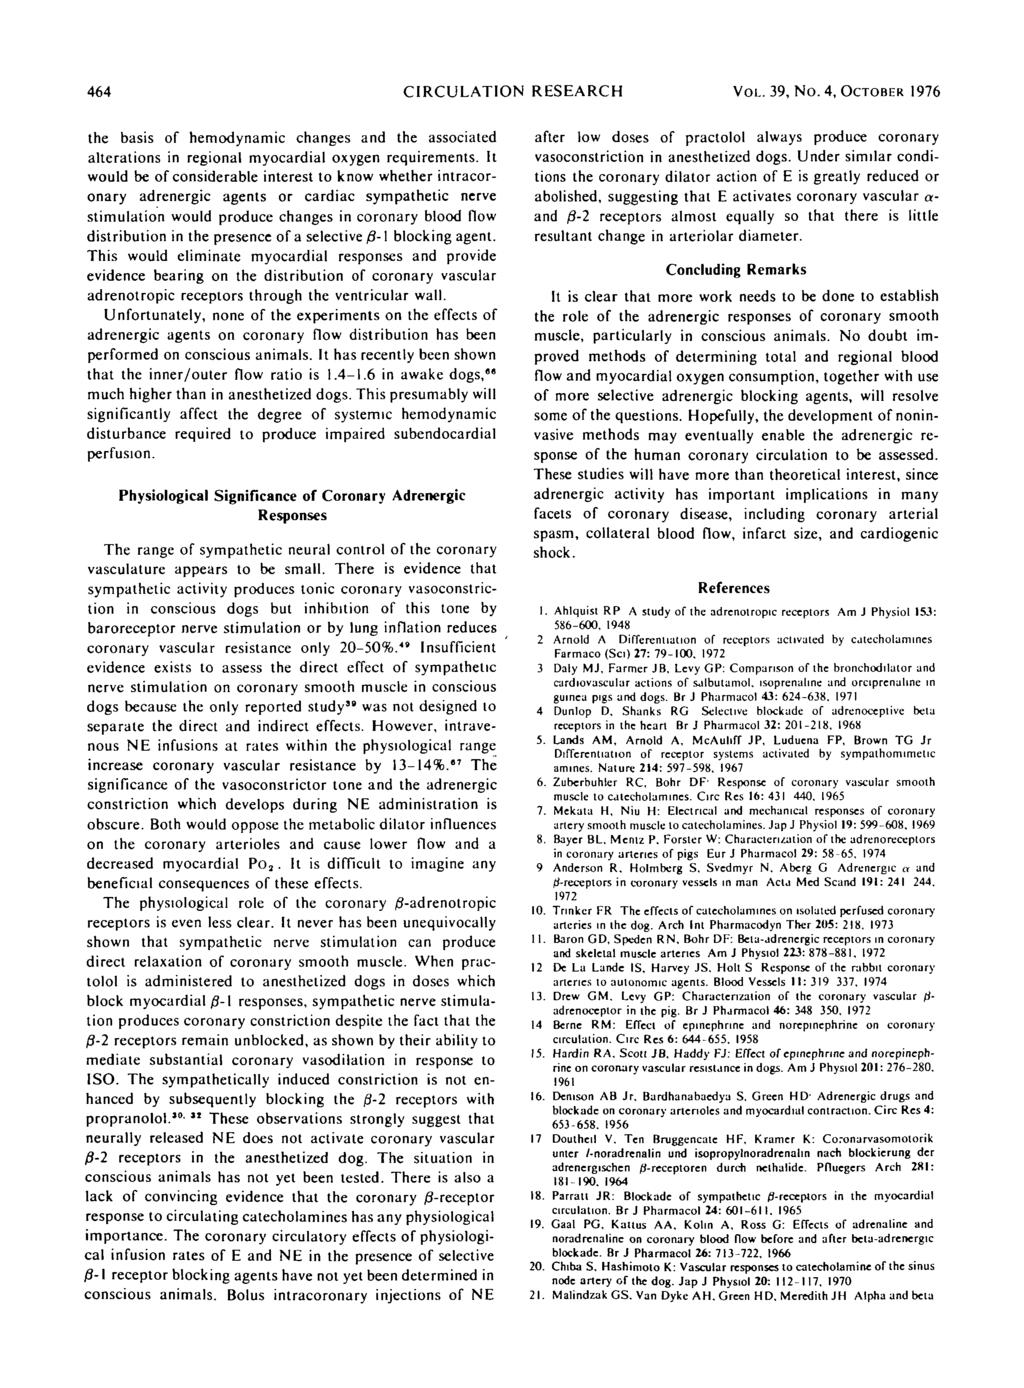 464 CIRCULATION RESEARCH VOL. 39, No. 4, OCTOBER 1976 the basis of hemodynamic changes and the associated alterations in regional myocardial oxygen requirements.